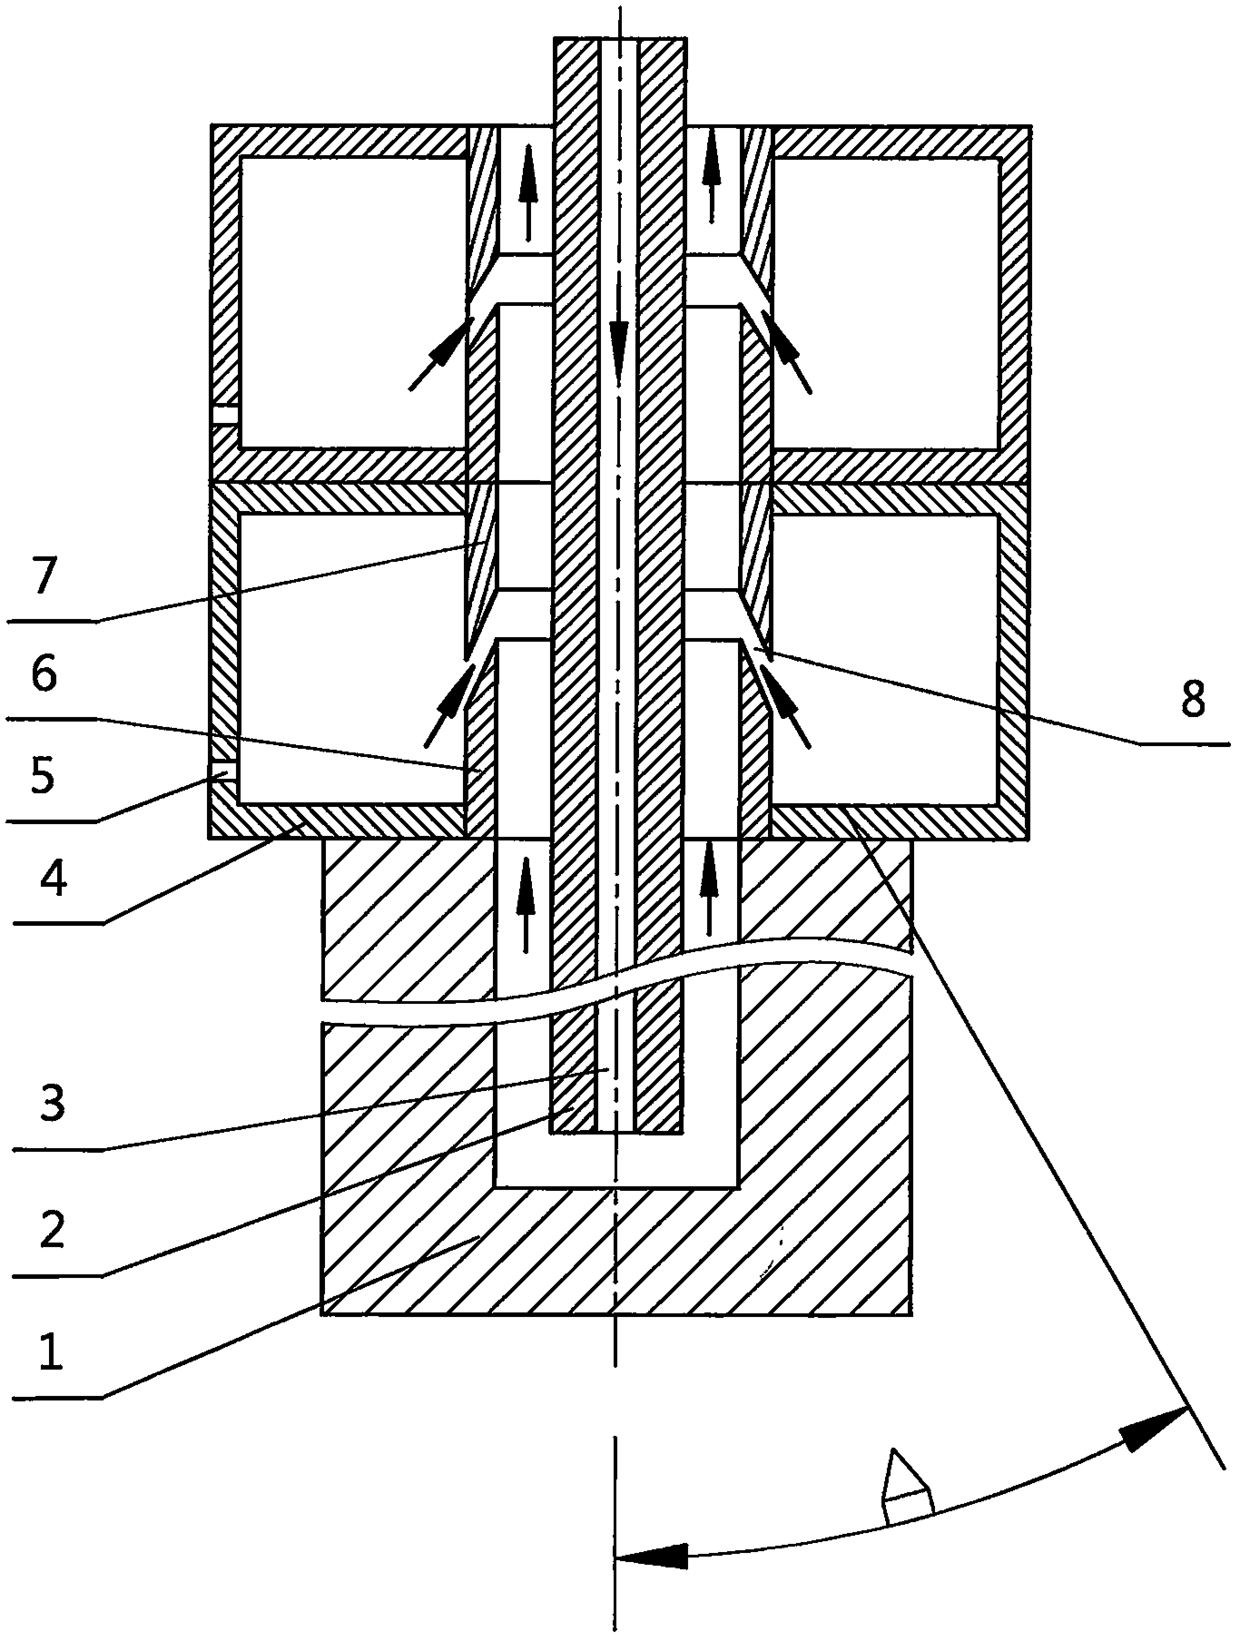 Discharging method for electric corrosion products for electric spark machining